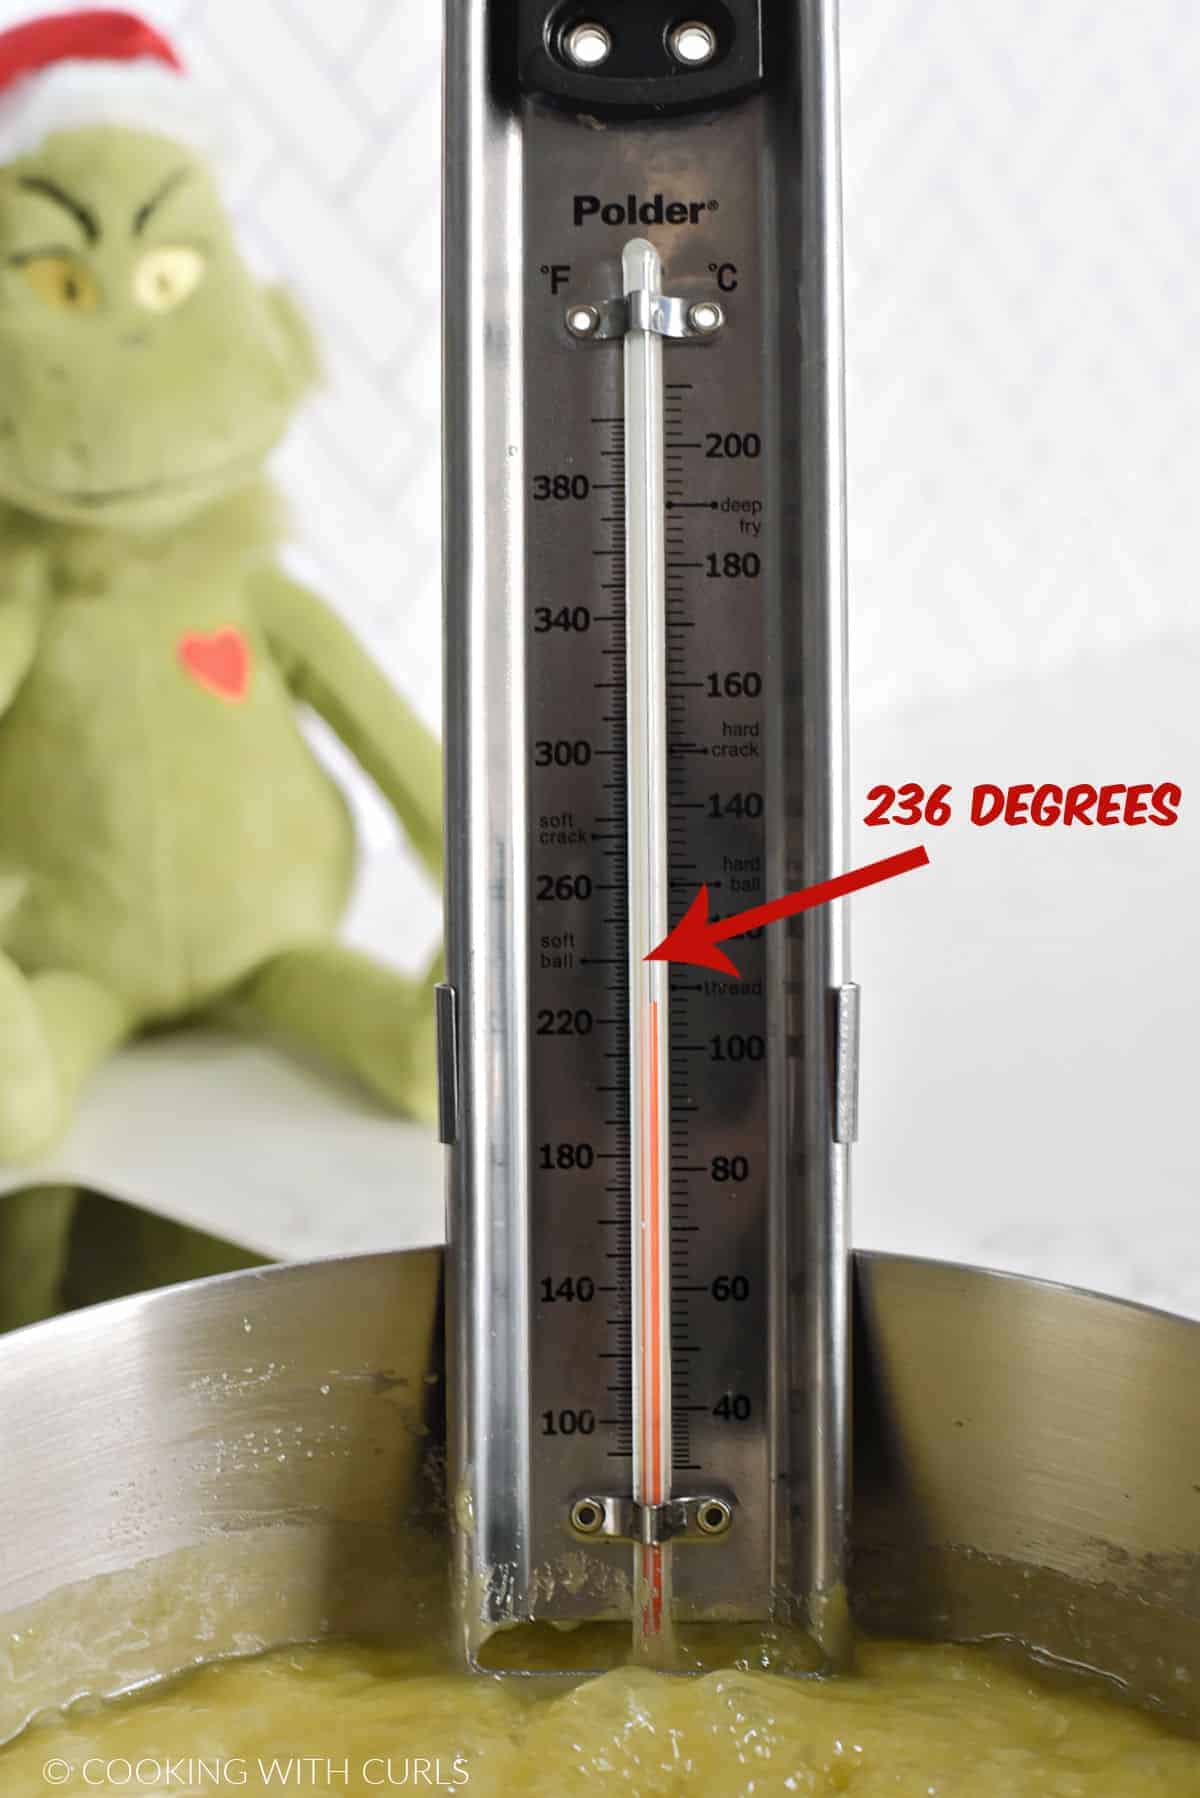 Candy thermometer with red arrow showing 236 degrees.